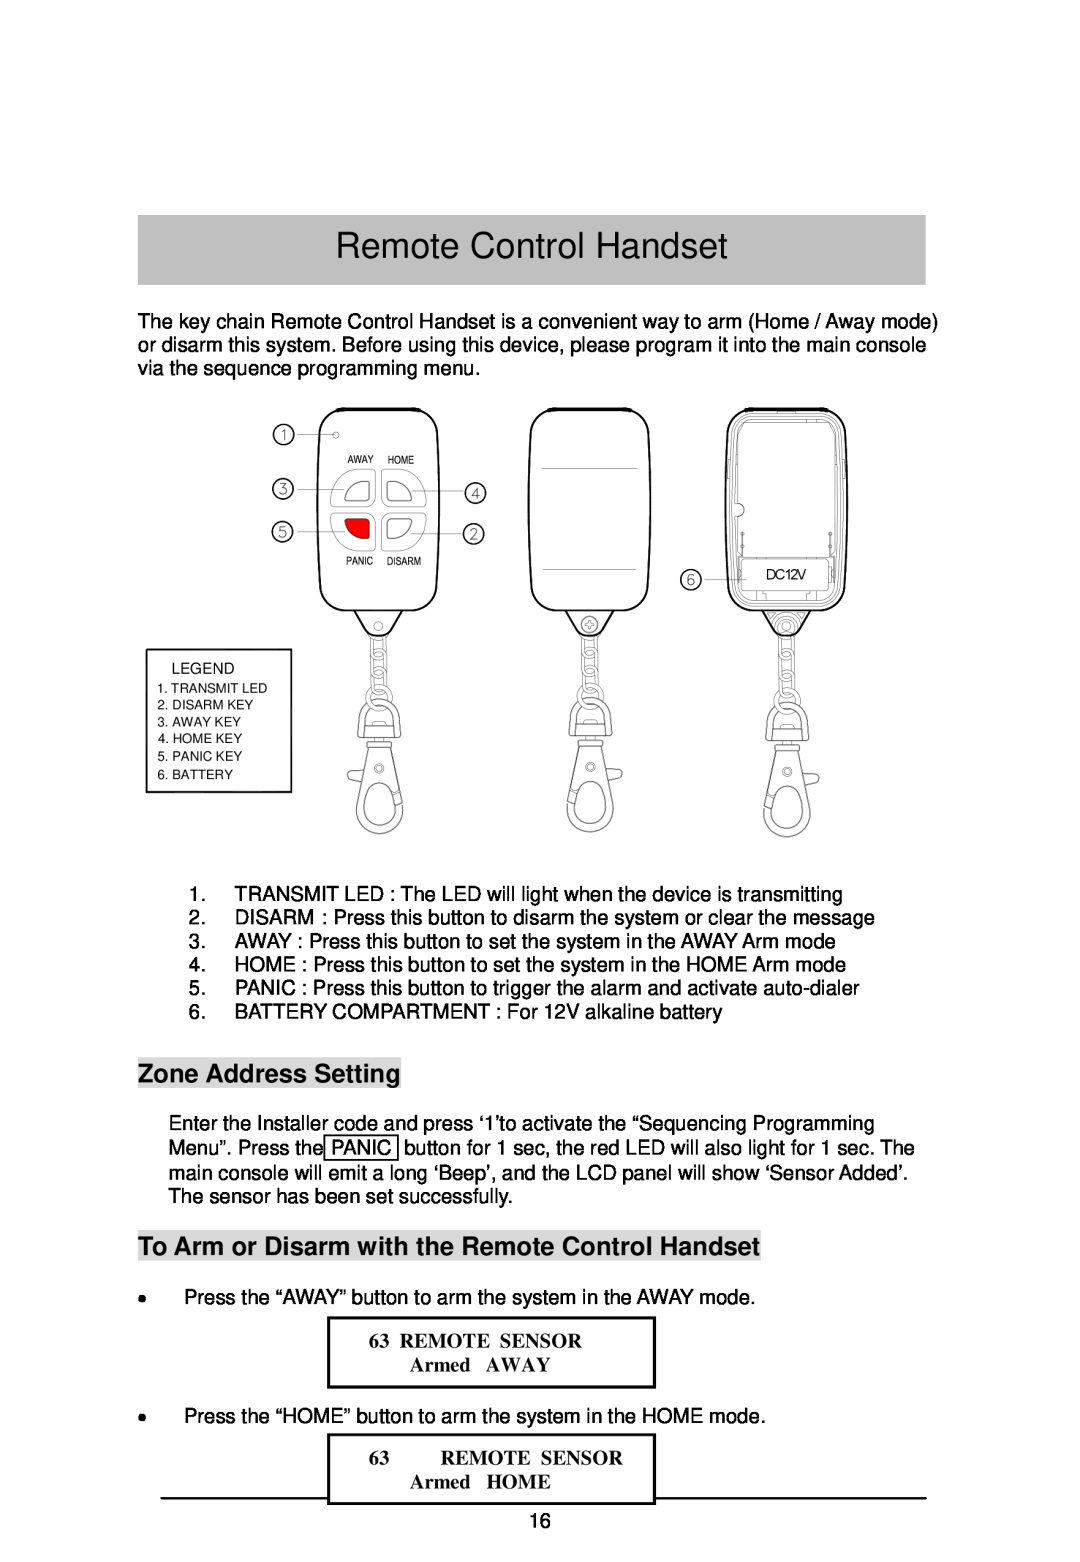 LOREX Technology WA-410 instruction manual Zone Address Setting, To Arm or Disarm with the Remote Control Handset 